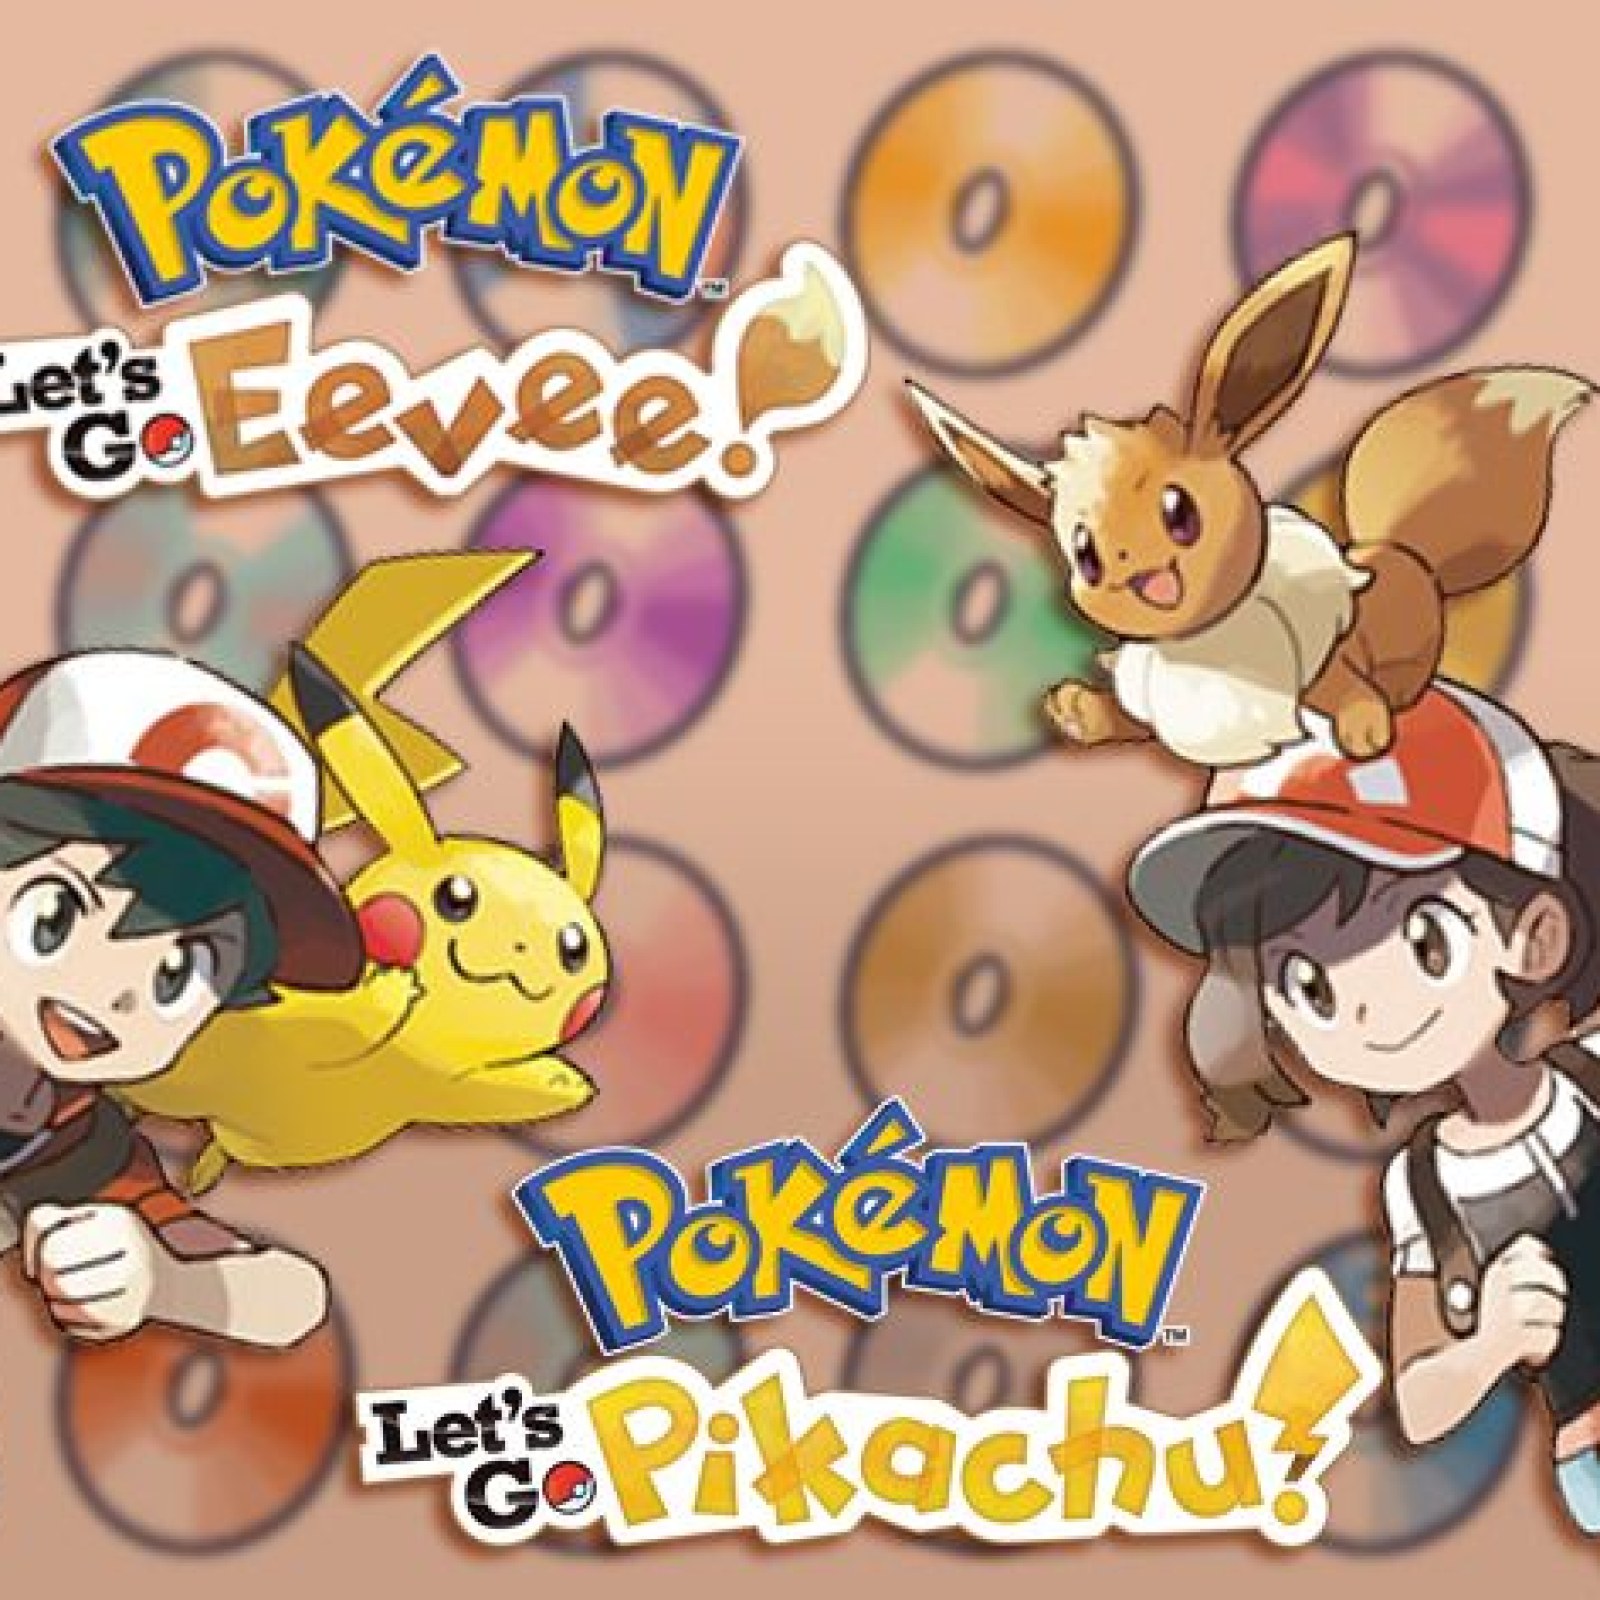 Pokémon Lets Go Pikachu And Eevee Tm Locations Where To